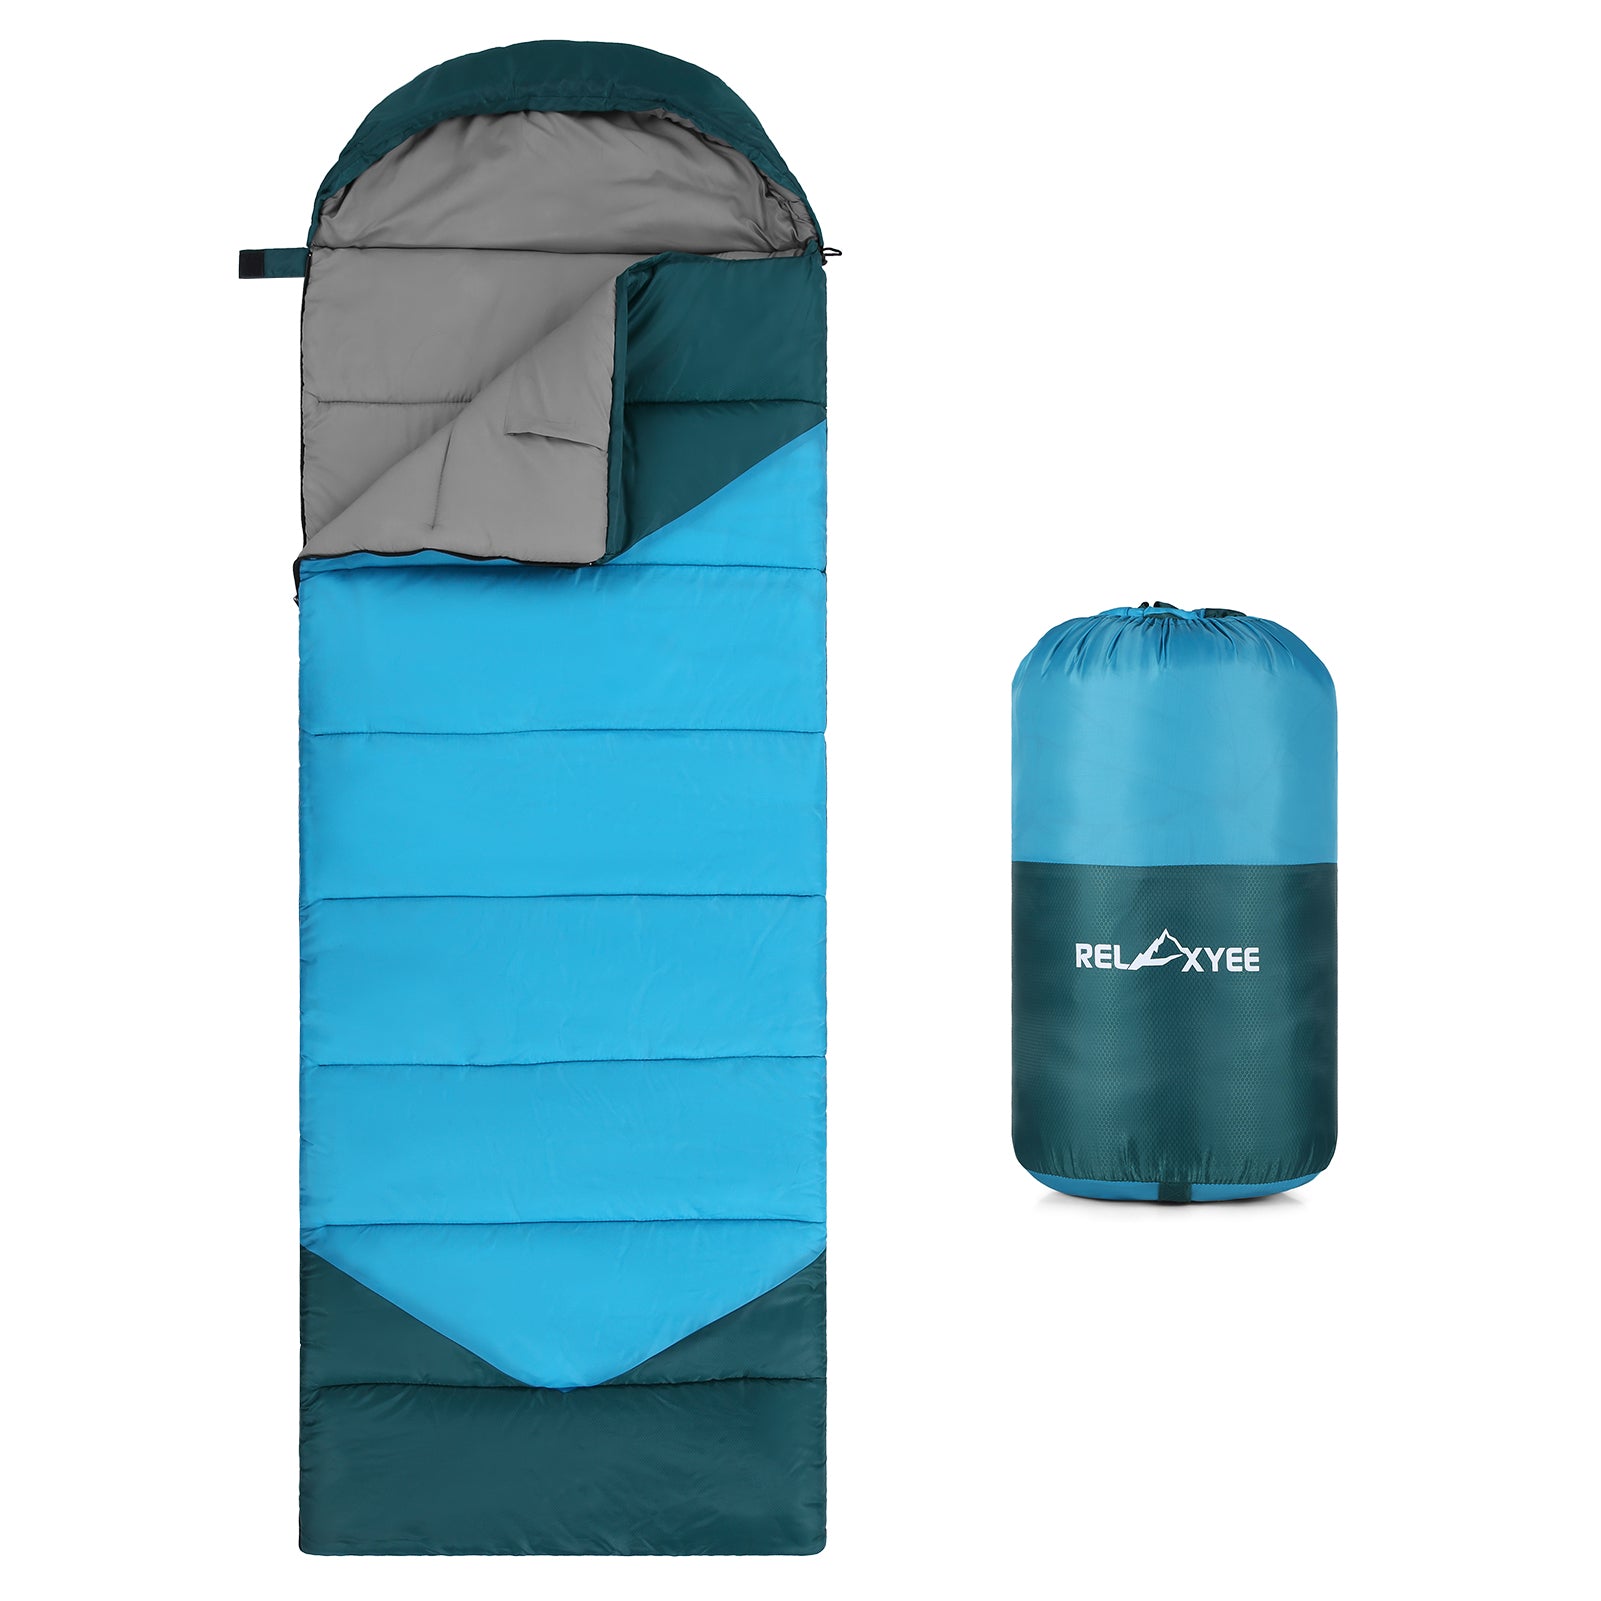 RELAXYEE Camping Sleeping Bag for Adults Outdoor Water-resistant Cold Weather Sleeping Bag Compact Camping Gear for 3 Seasons Hiking Backpacking Traveling